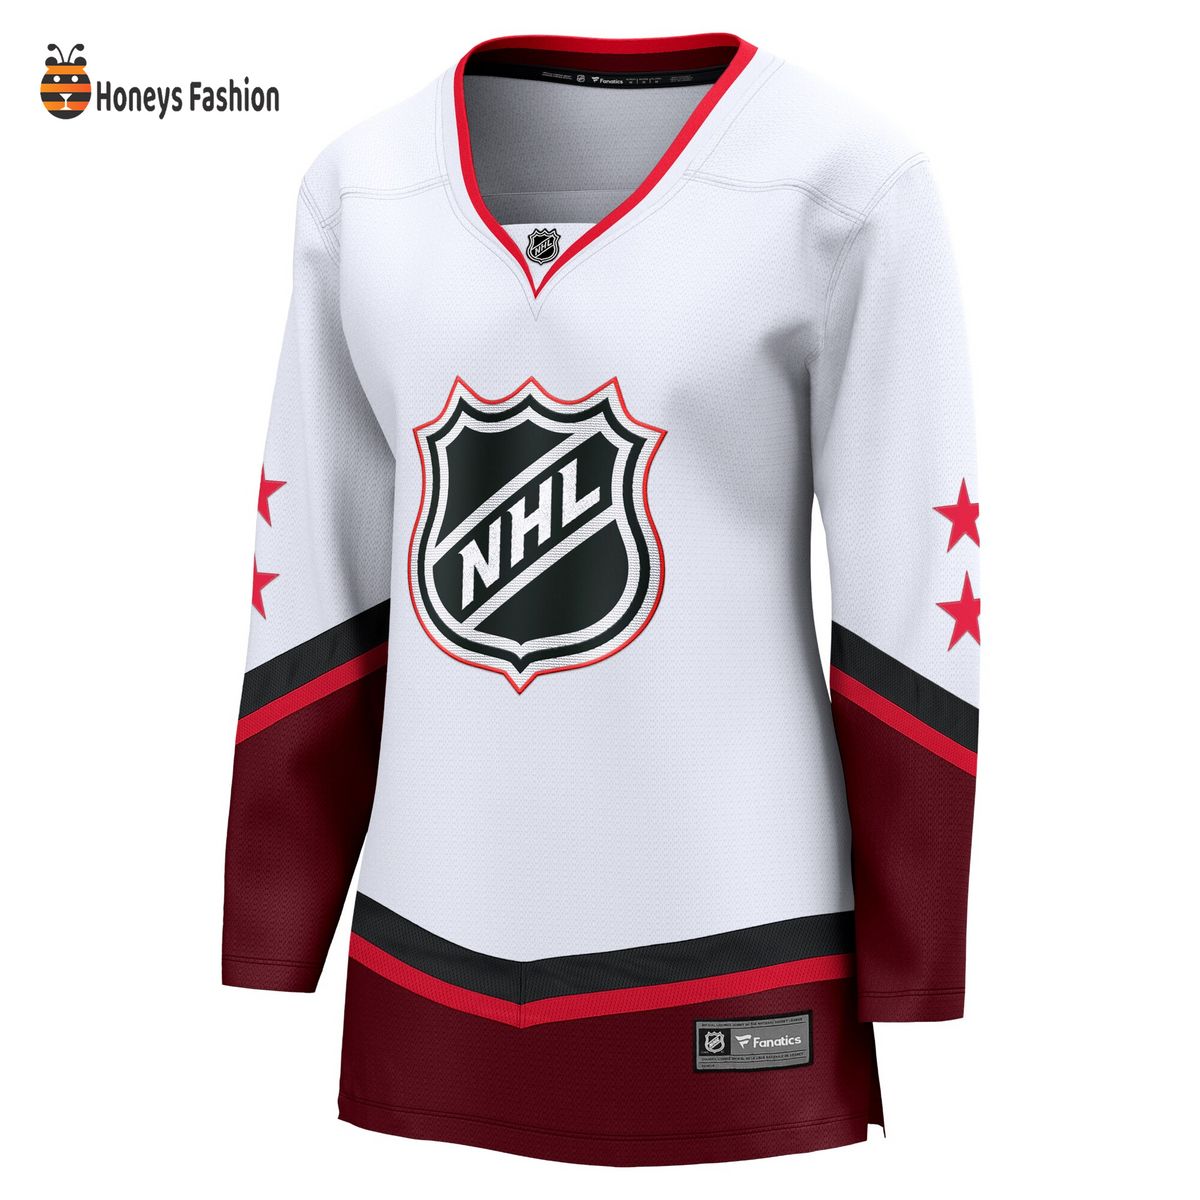 Women’s White 2022 NHL All-Star Game Eastern Conference Breakaway Jersey